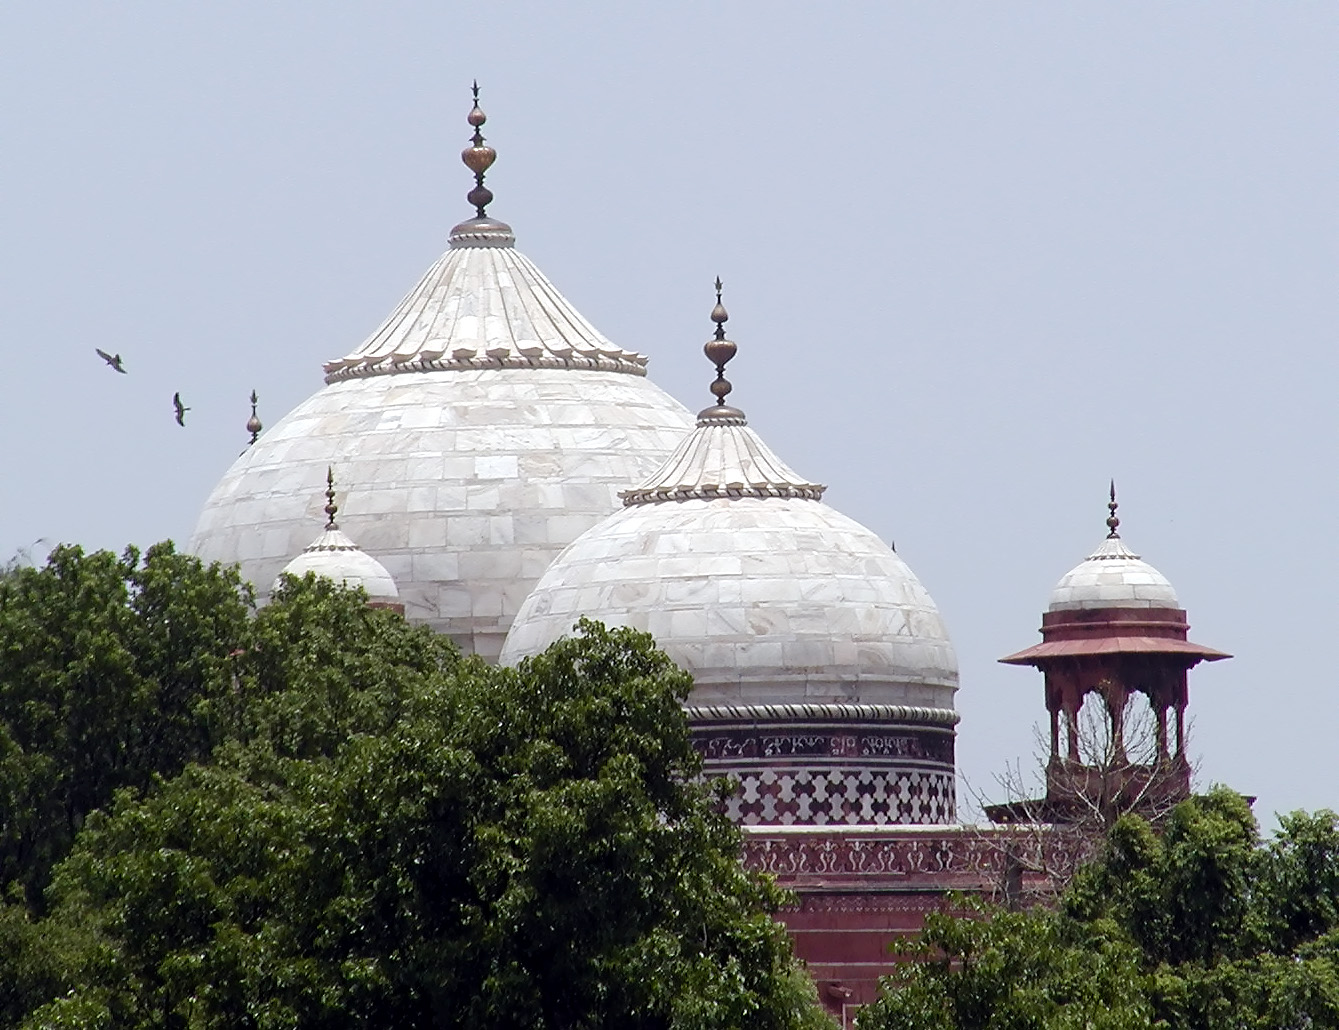 10-Jun-2001 12:03 - Agra - The Taj Mahal - Domes of the Mosque to the west of the mausoleum